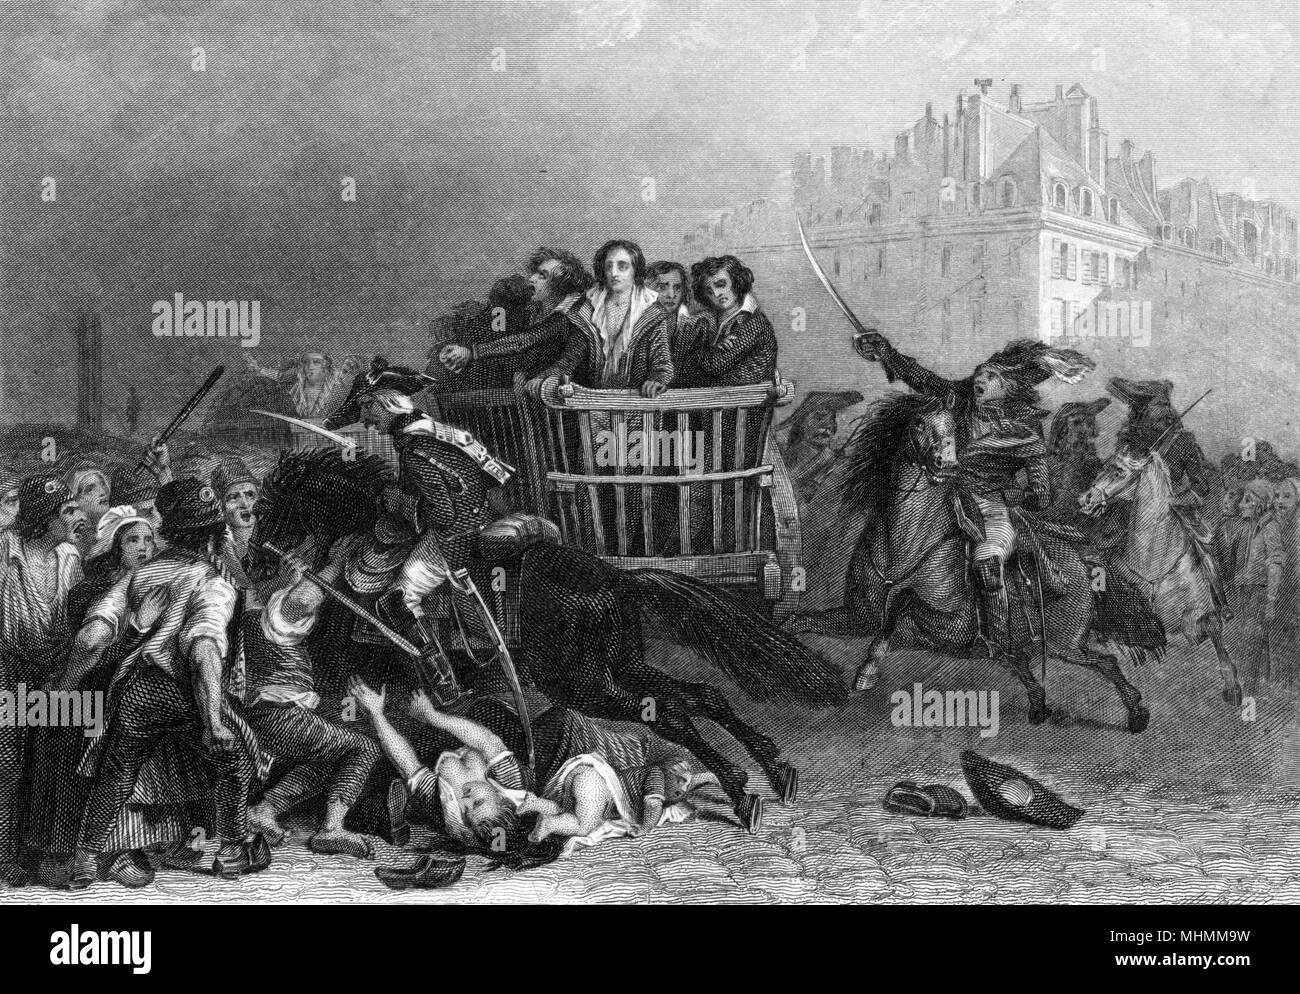 The last wagon-load of victims are transported to the guillotine - despite the objections of the populace.      Date: circa 1794 Stock Photo